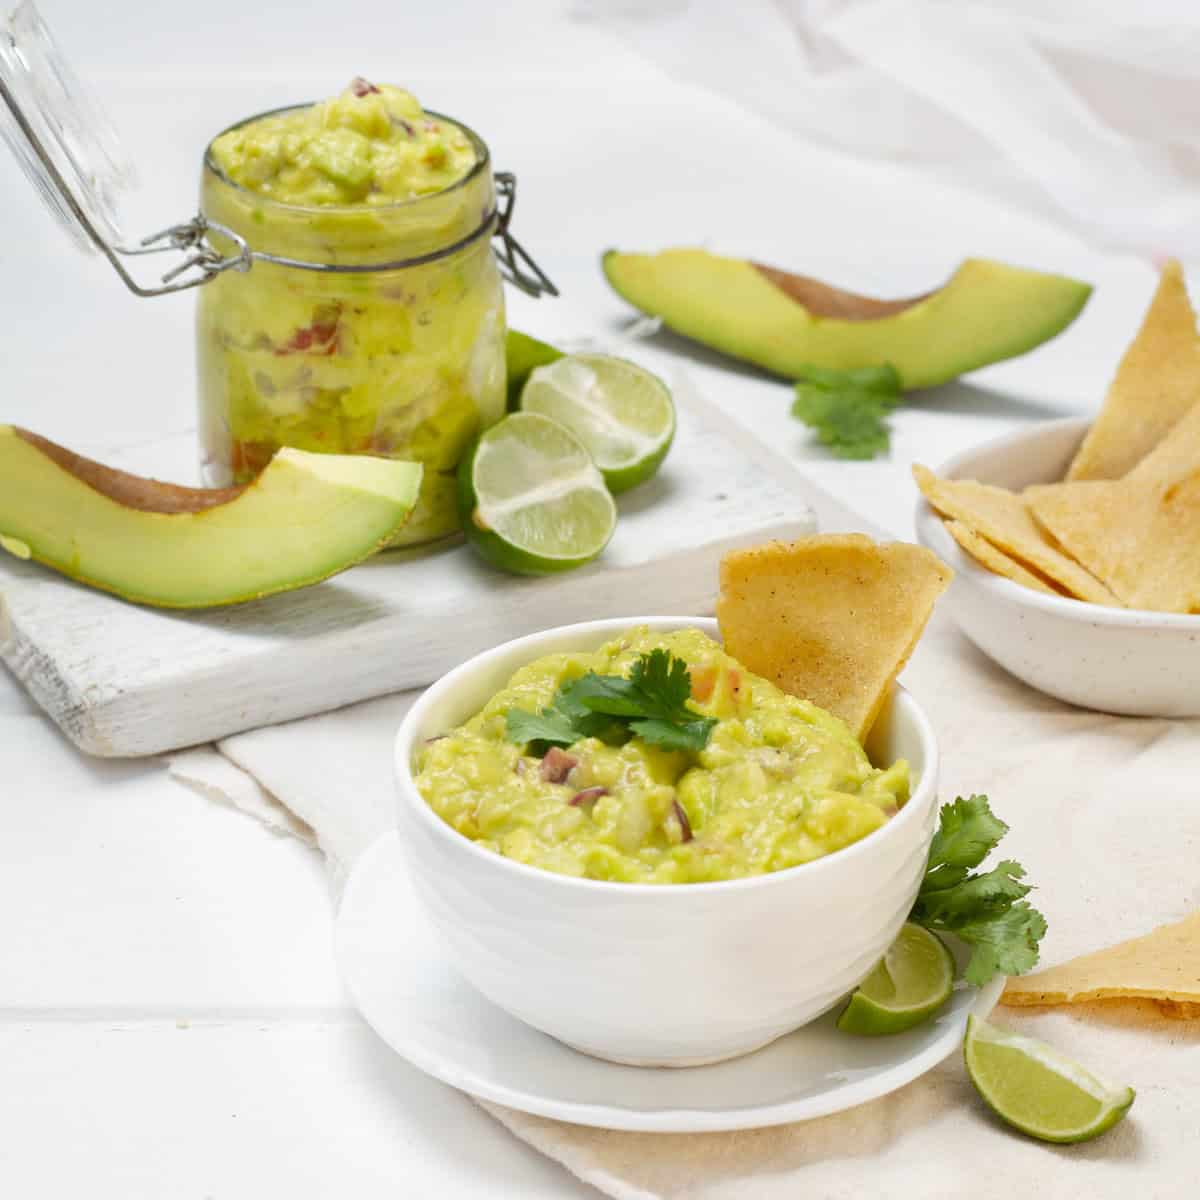 Guacamole served in a bowl with lemon and avocado slices